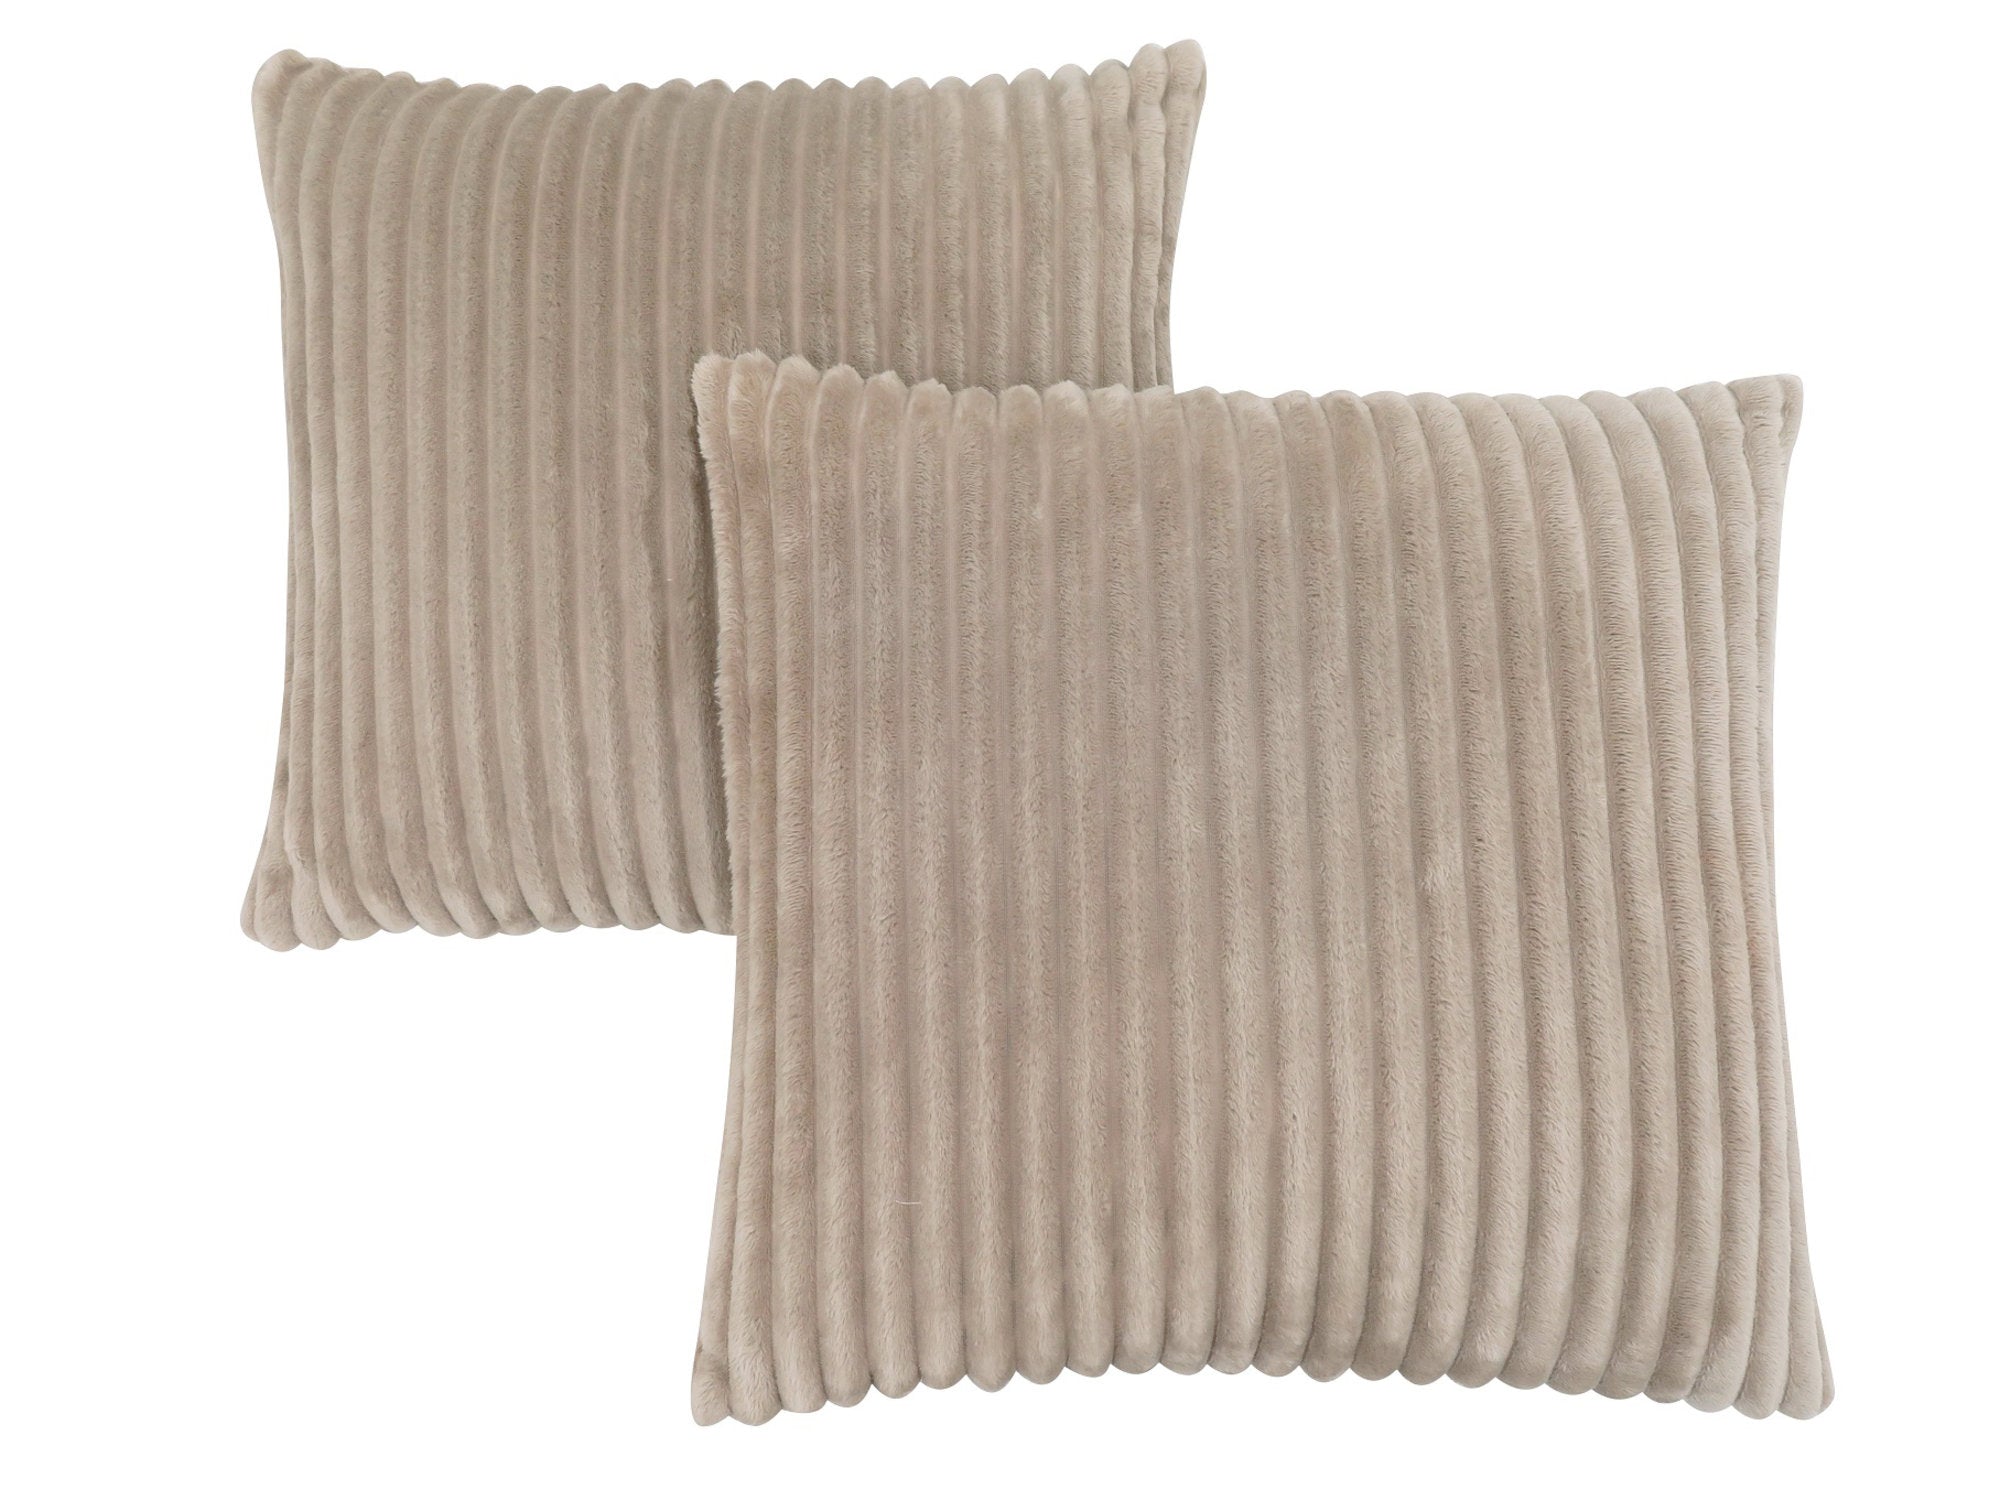 Pillow - 18X 18 / Beige Ultra Soft Ribbed Style / 2Pcs